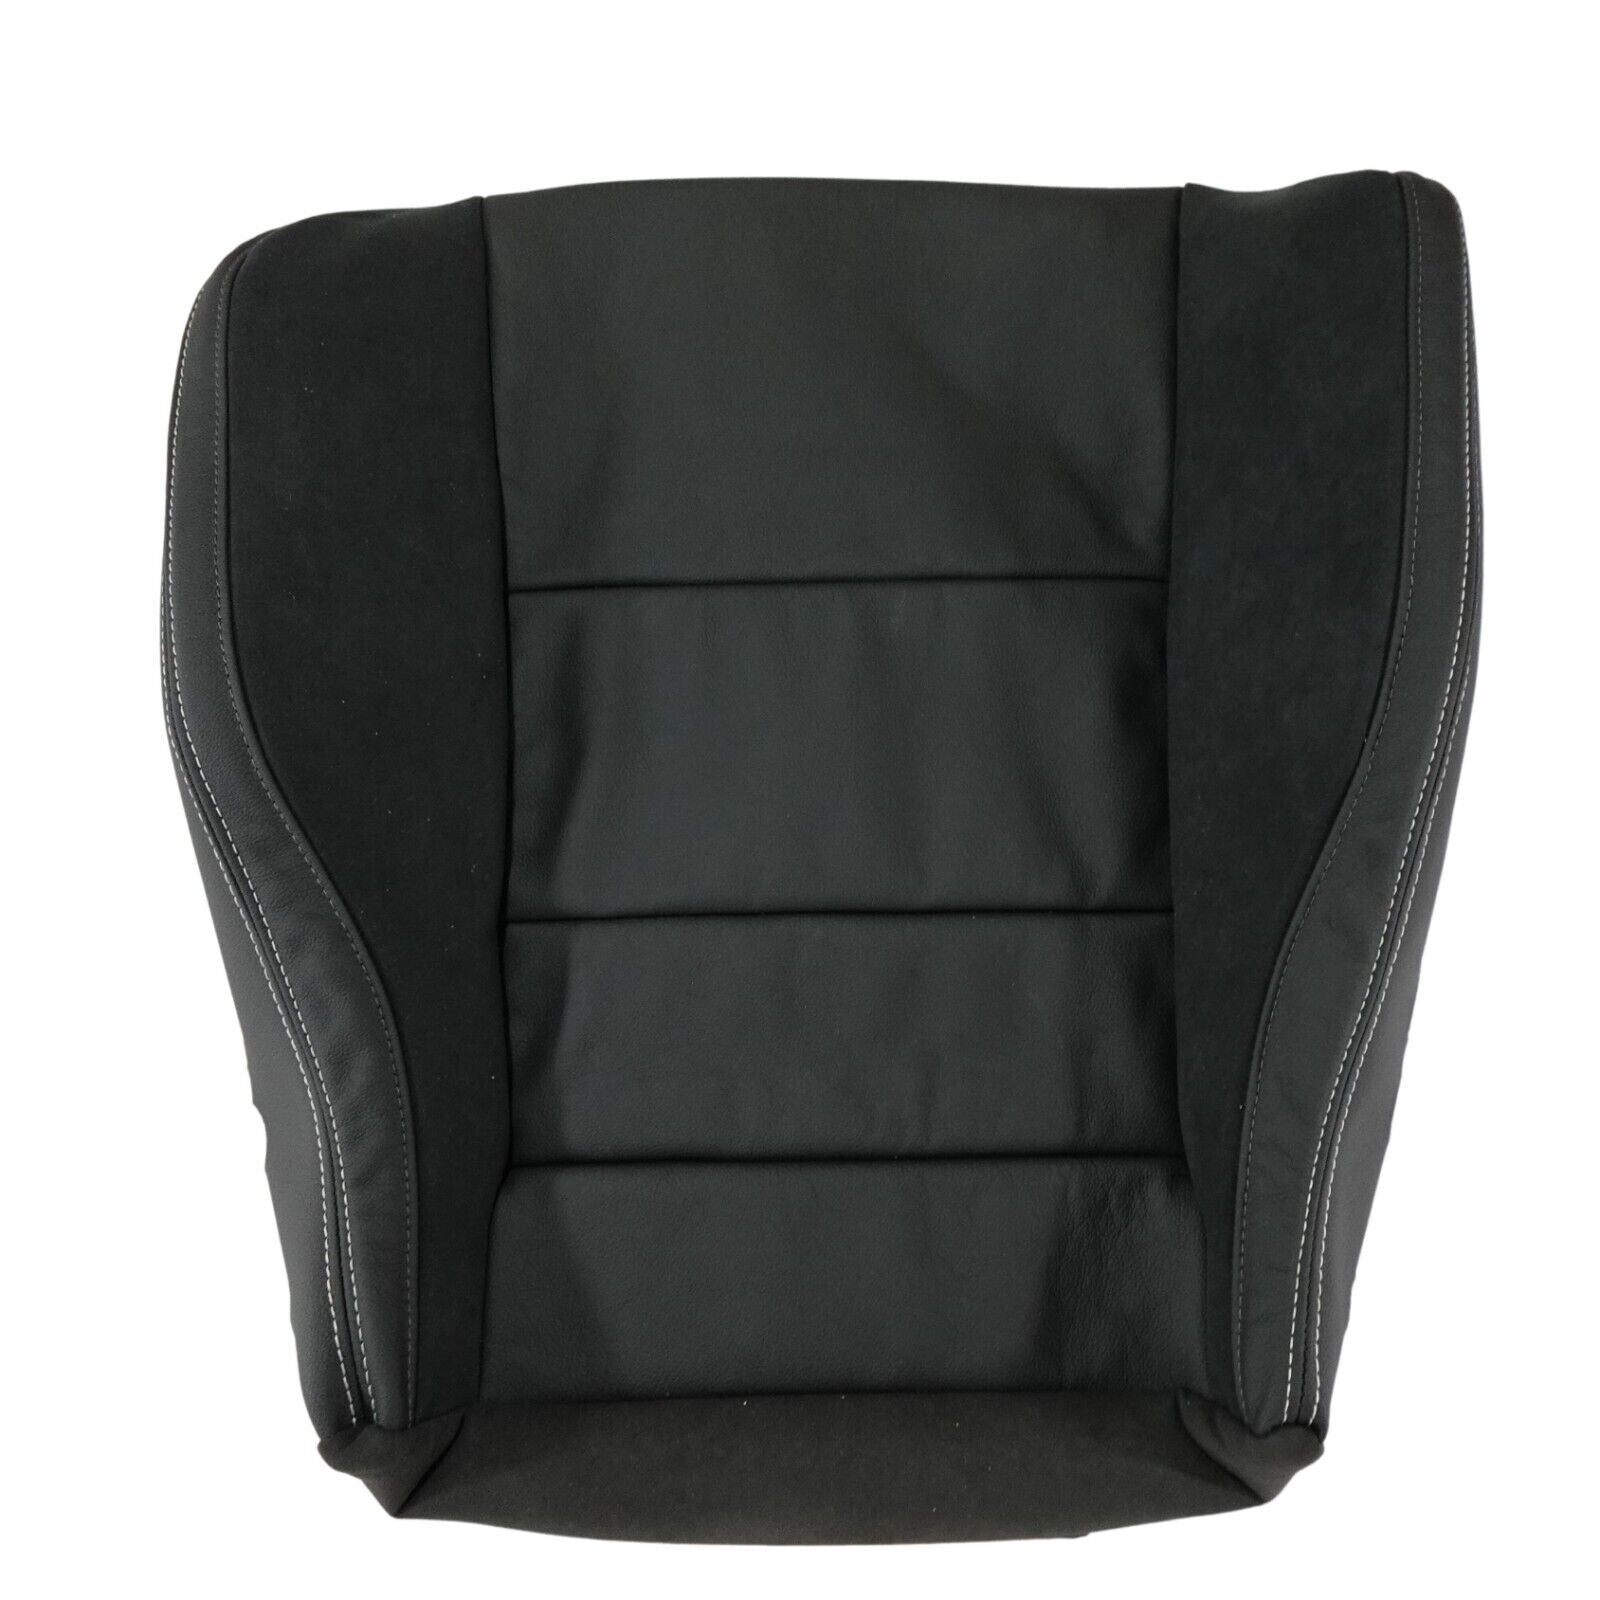 HSV VE MALOO UTE FRONT SEAT BASE COVER LEATHER ONYX LEFT OR RIGHT